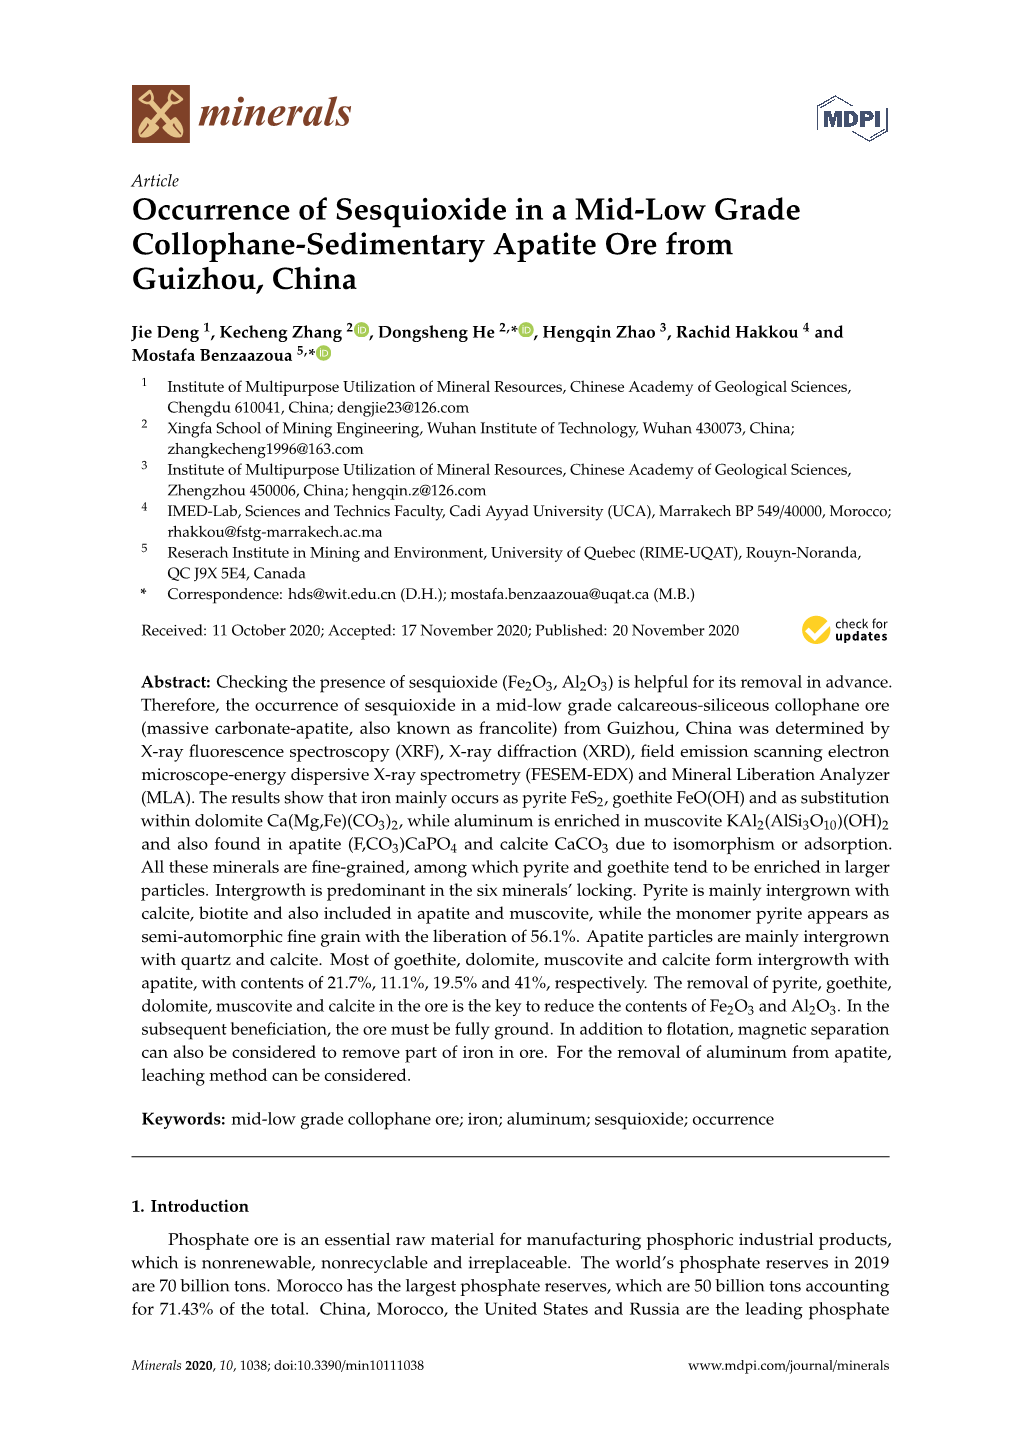 Occurrence of Sesquioxide in a Mid-Low Grade Collophane-Sedimentary Apatite Ore from Guizhou, China